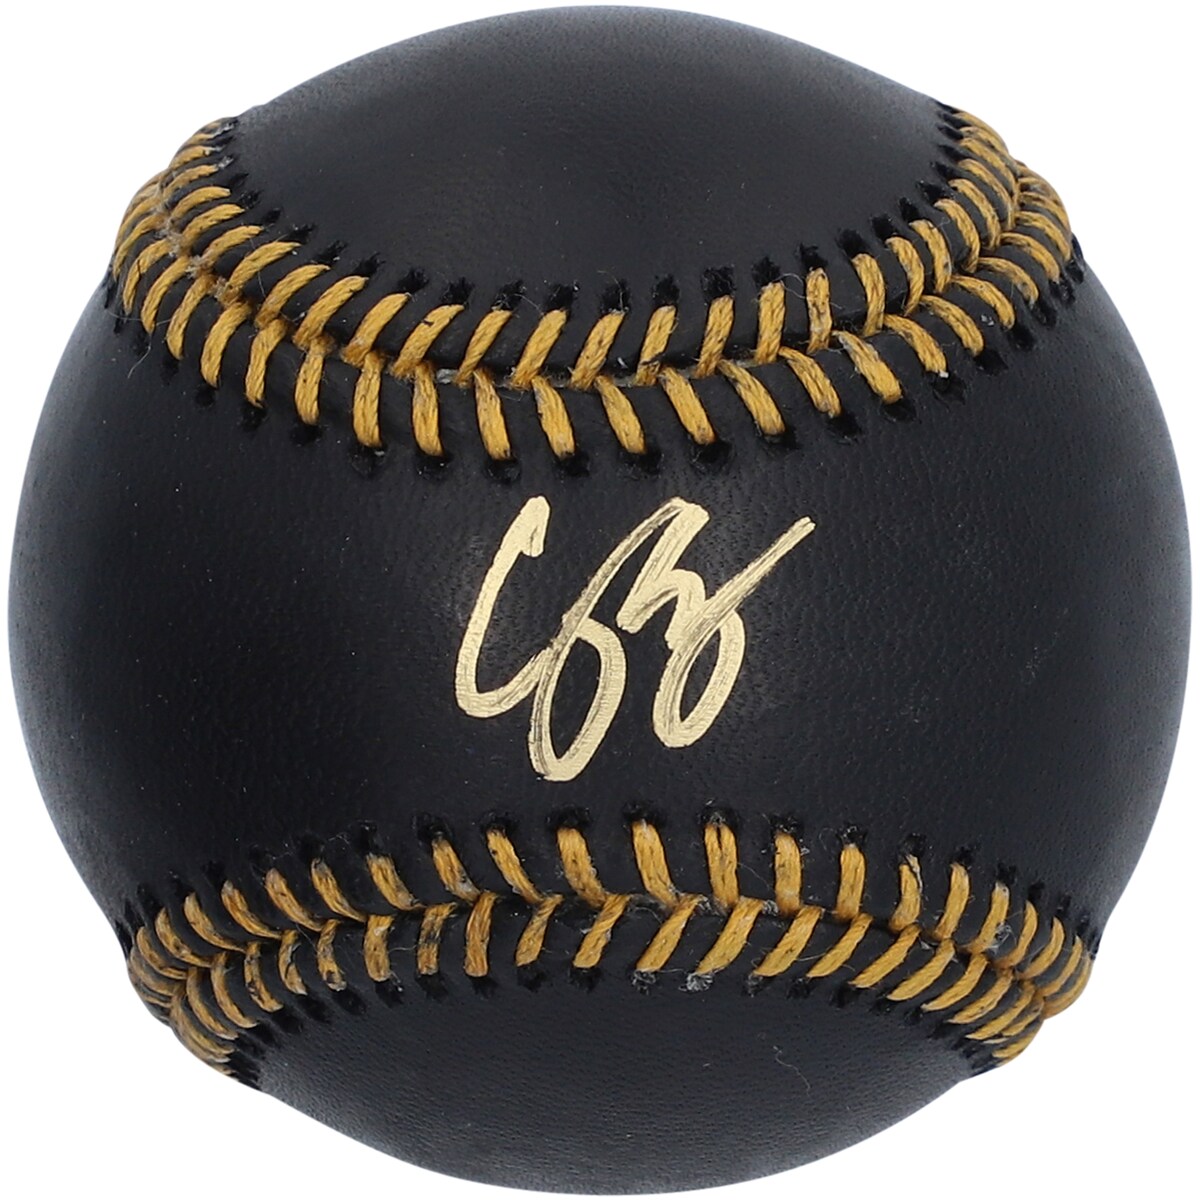 Autographed by Corey Seager, this Black Leather Baseball is ready to flaunt your Texas Rangers fandom. Featuring a uniqu...